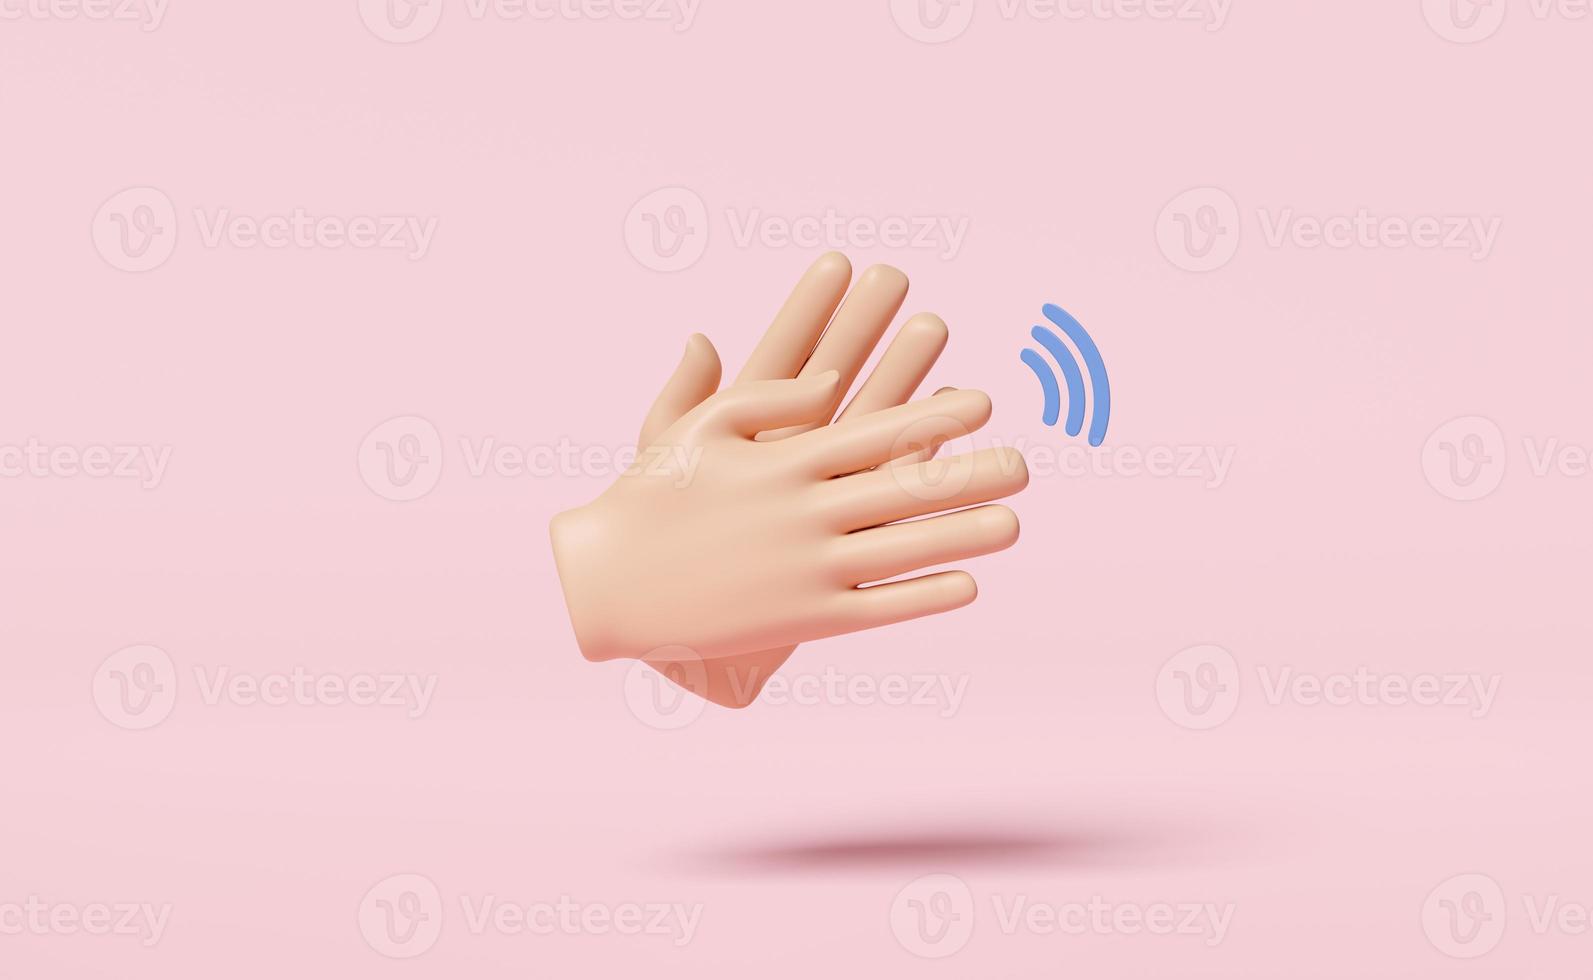 3D clapping hands or hands applauding icon isolated on pink background. congratulations on success concept. 3d render illustration photo